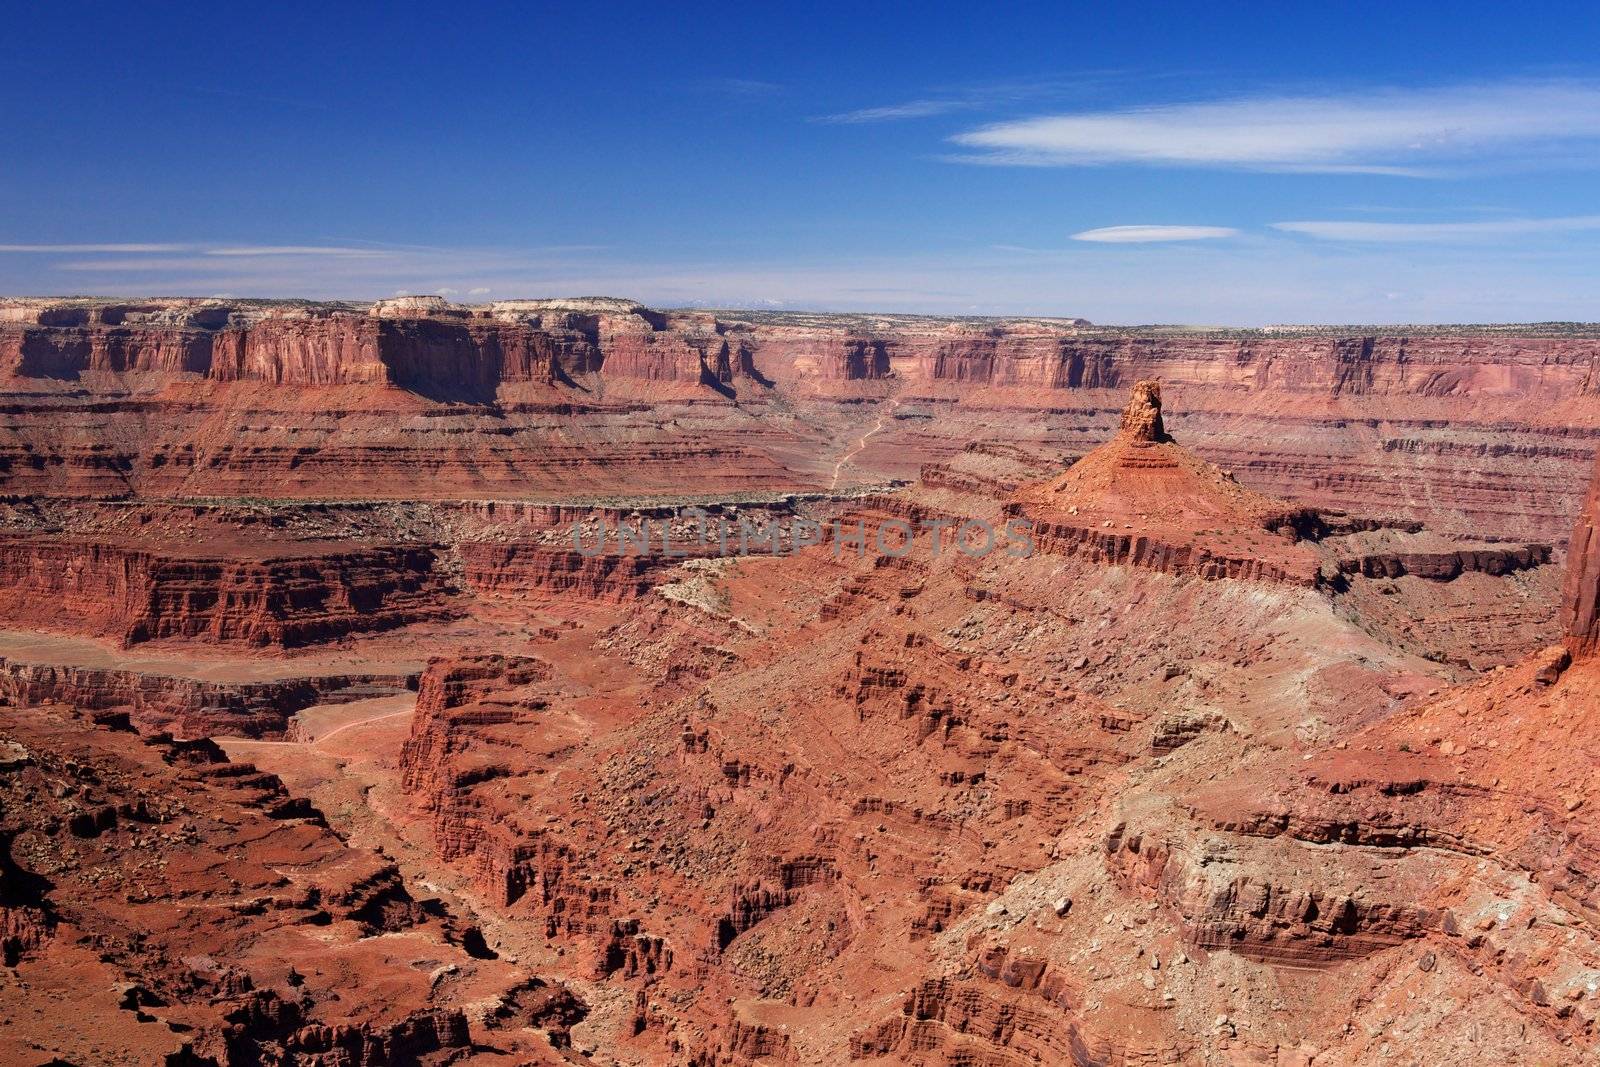 View looking into Dead Horse Canyon with blue sky